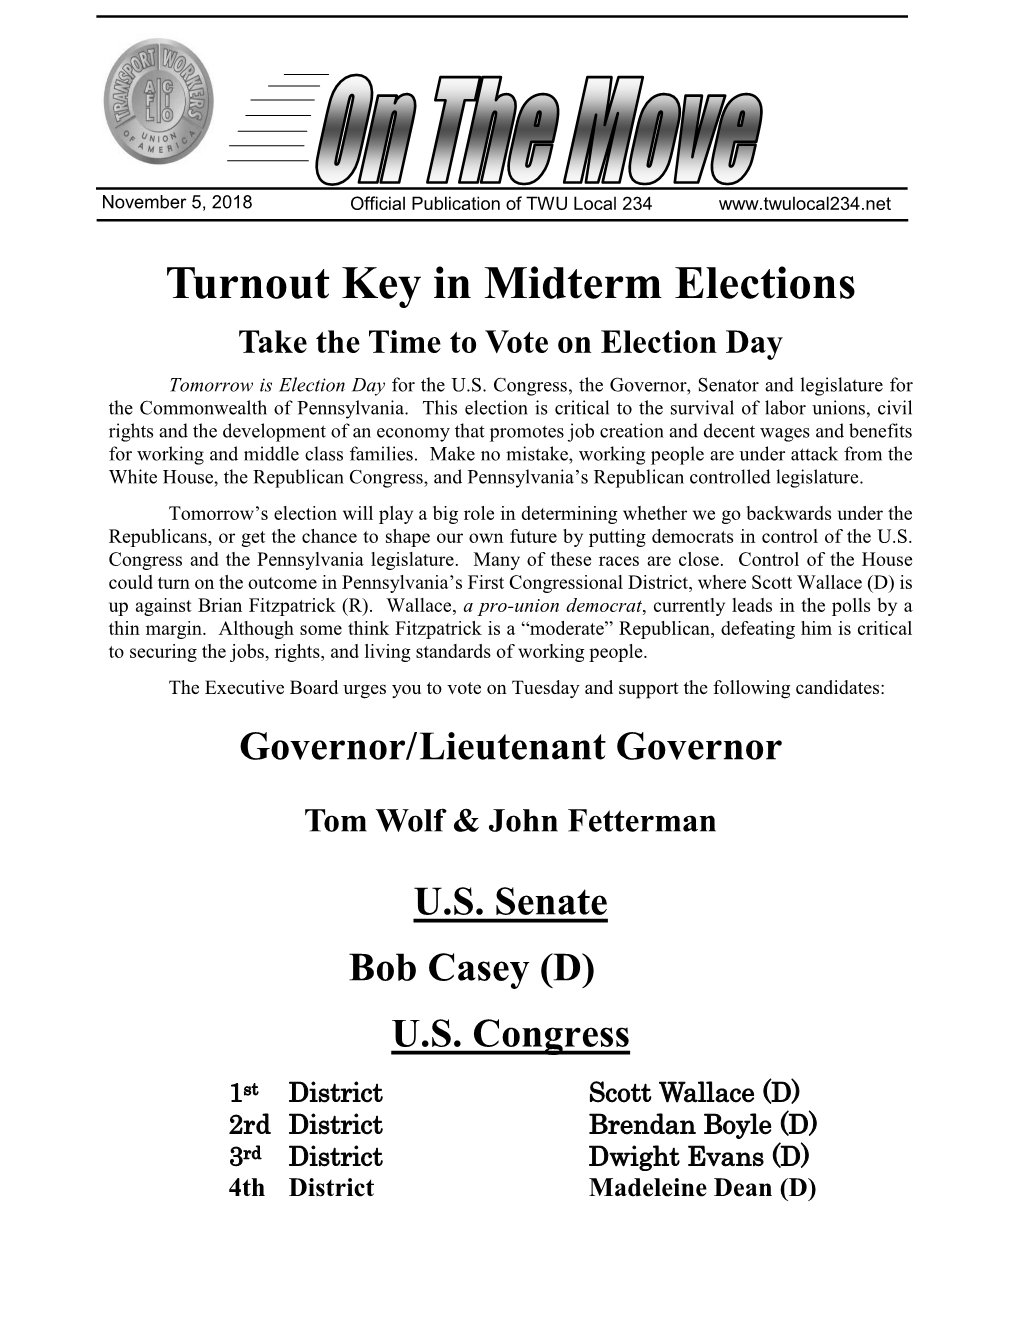 Turnout Key in Midterm Elections Take the Time to Vote on Election Day Tomorrow Is Election Day for the U.S